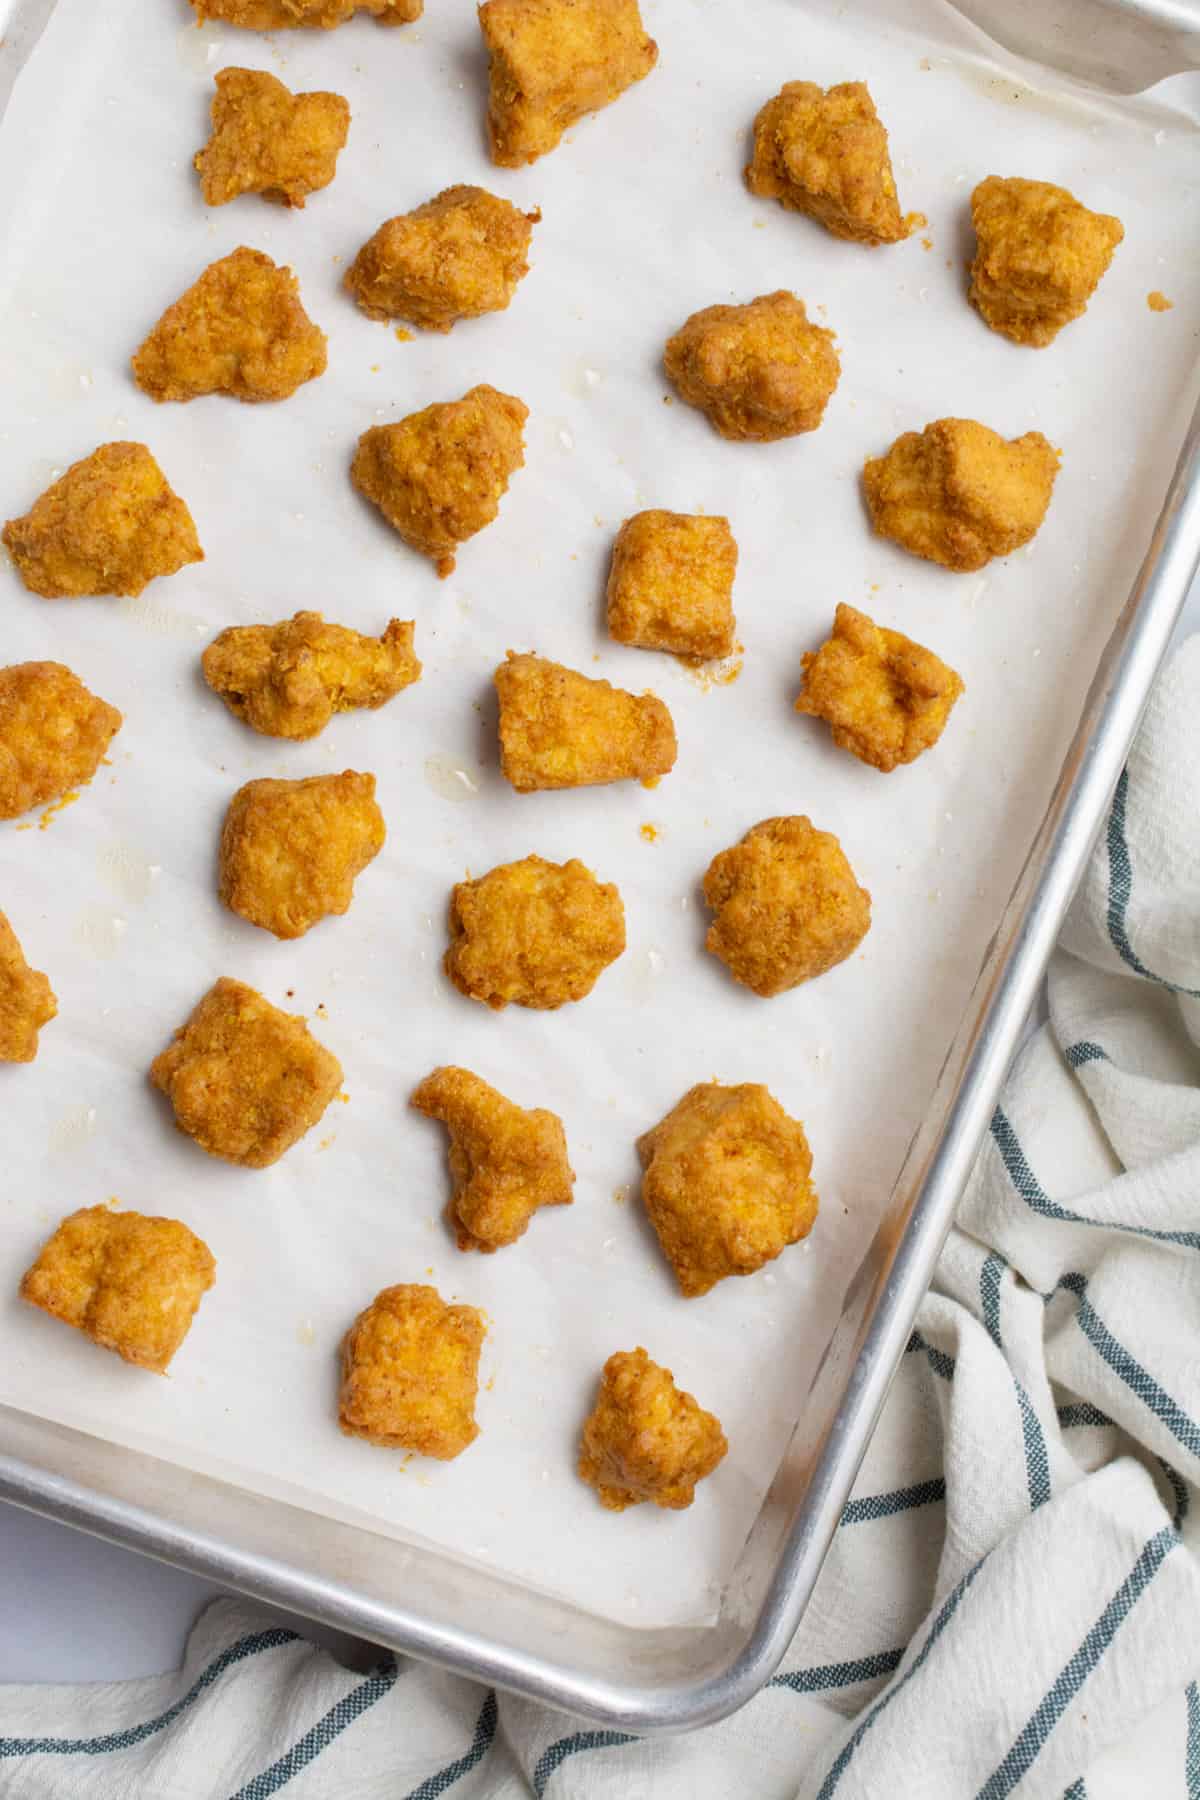 Tofu chicken nuggets on a baking sheet after baking.